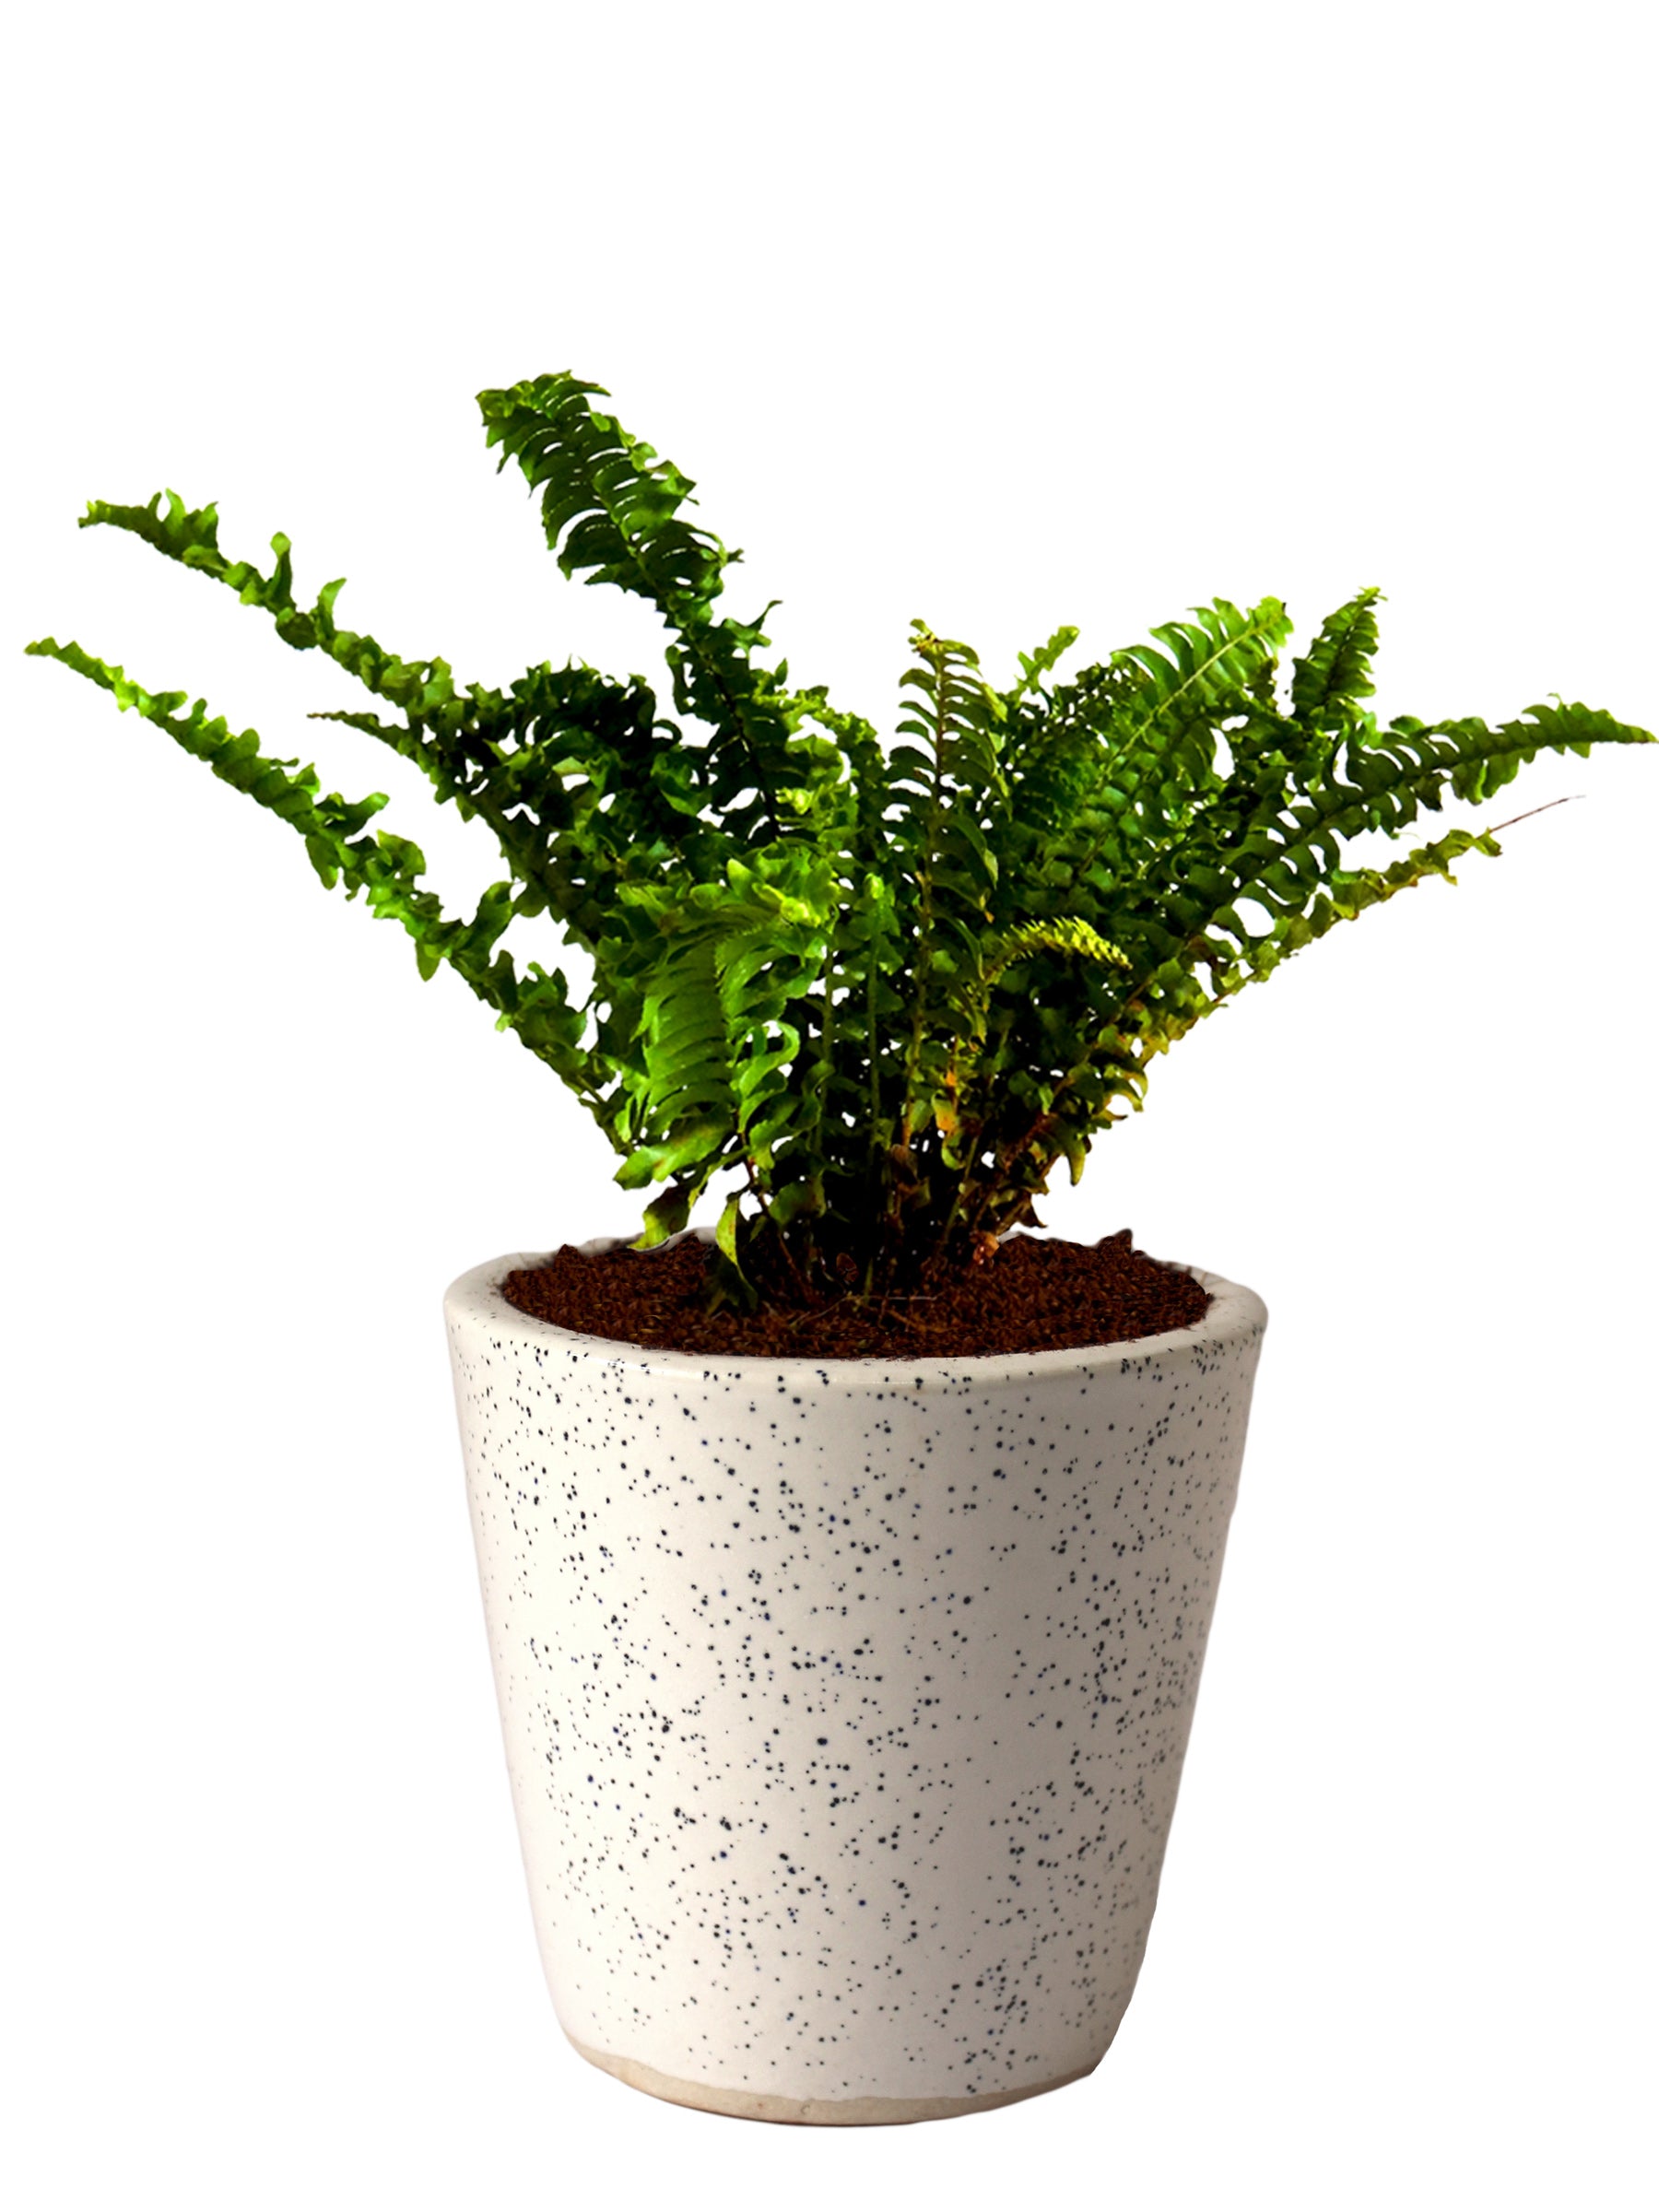 Air Purifying Good Luck Live Natural Plants in Exquisite Ceramic Pots. Best Indoor Plants online in India. Best green gifts for corporate or any occasions. Love plants as gifts. Low maintenance quality houseplants shipped all over India.